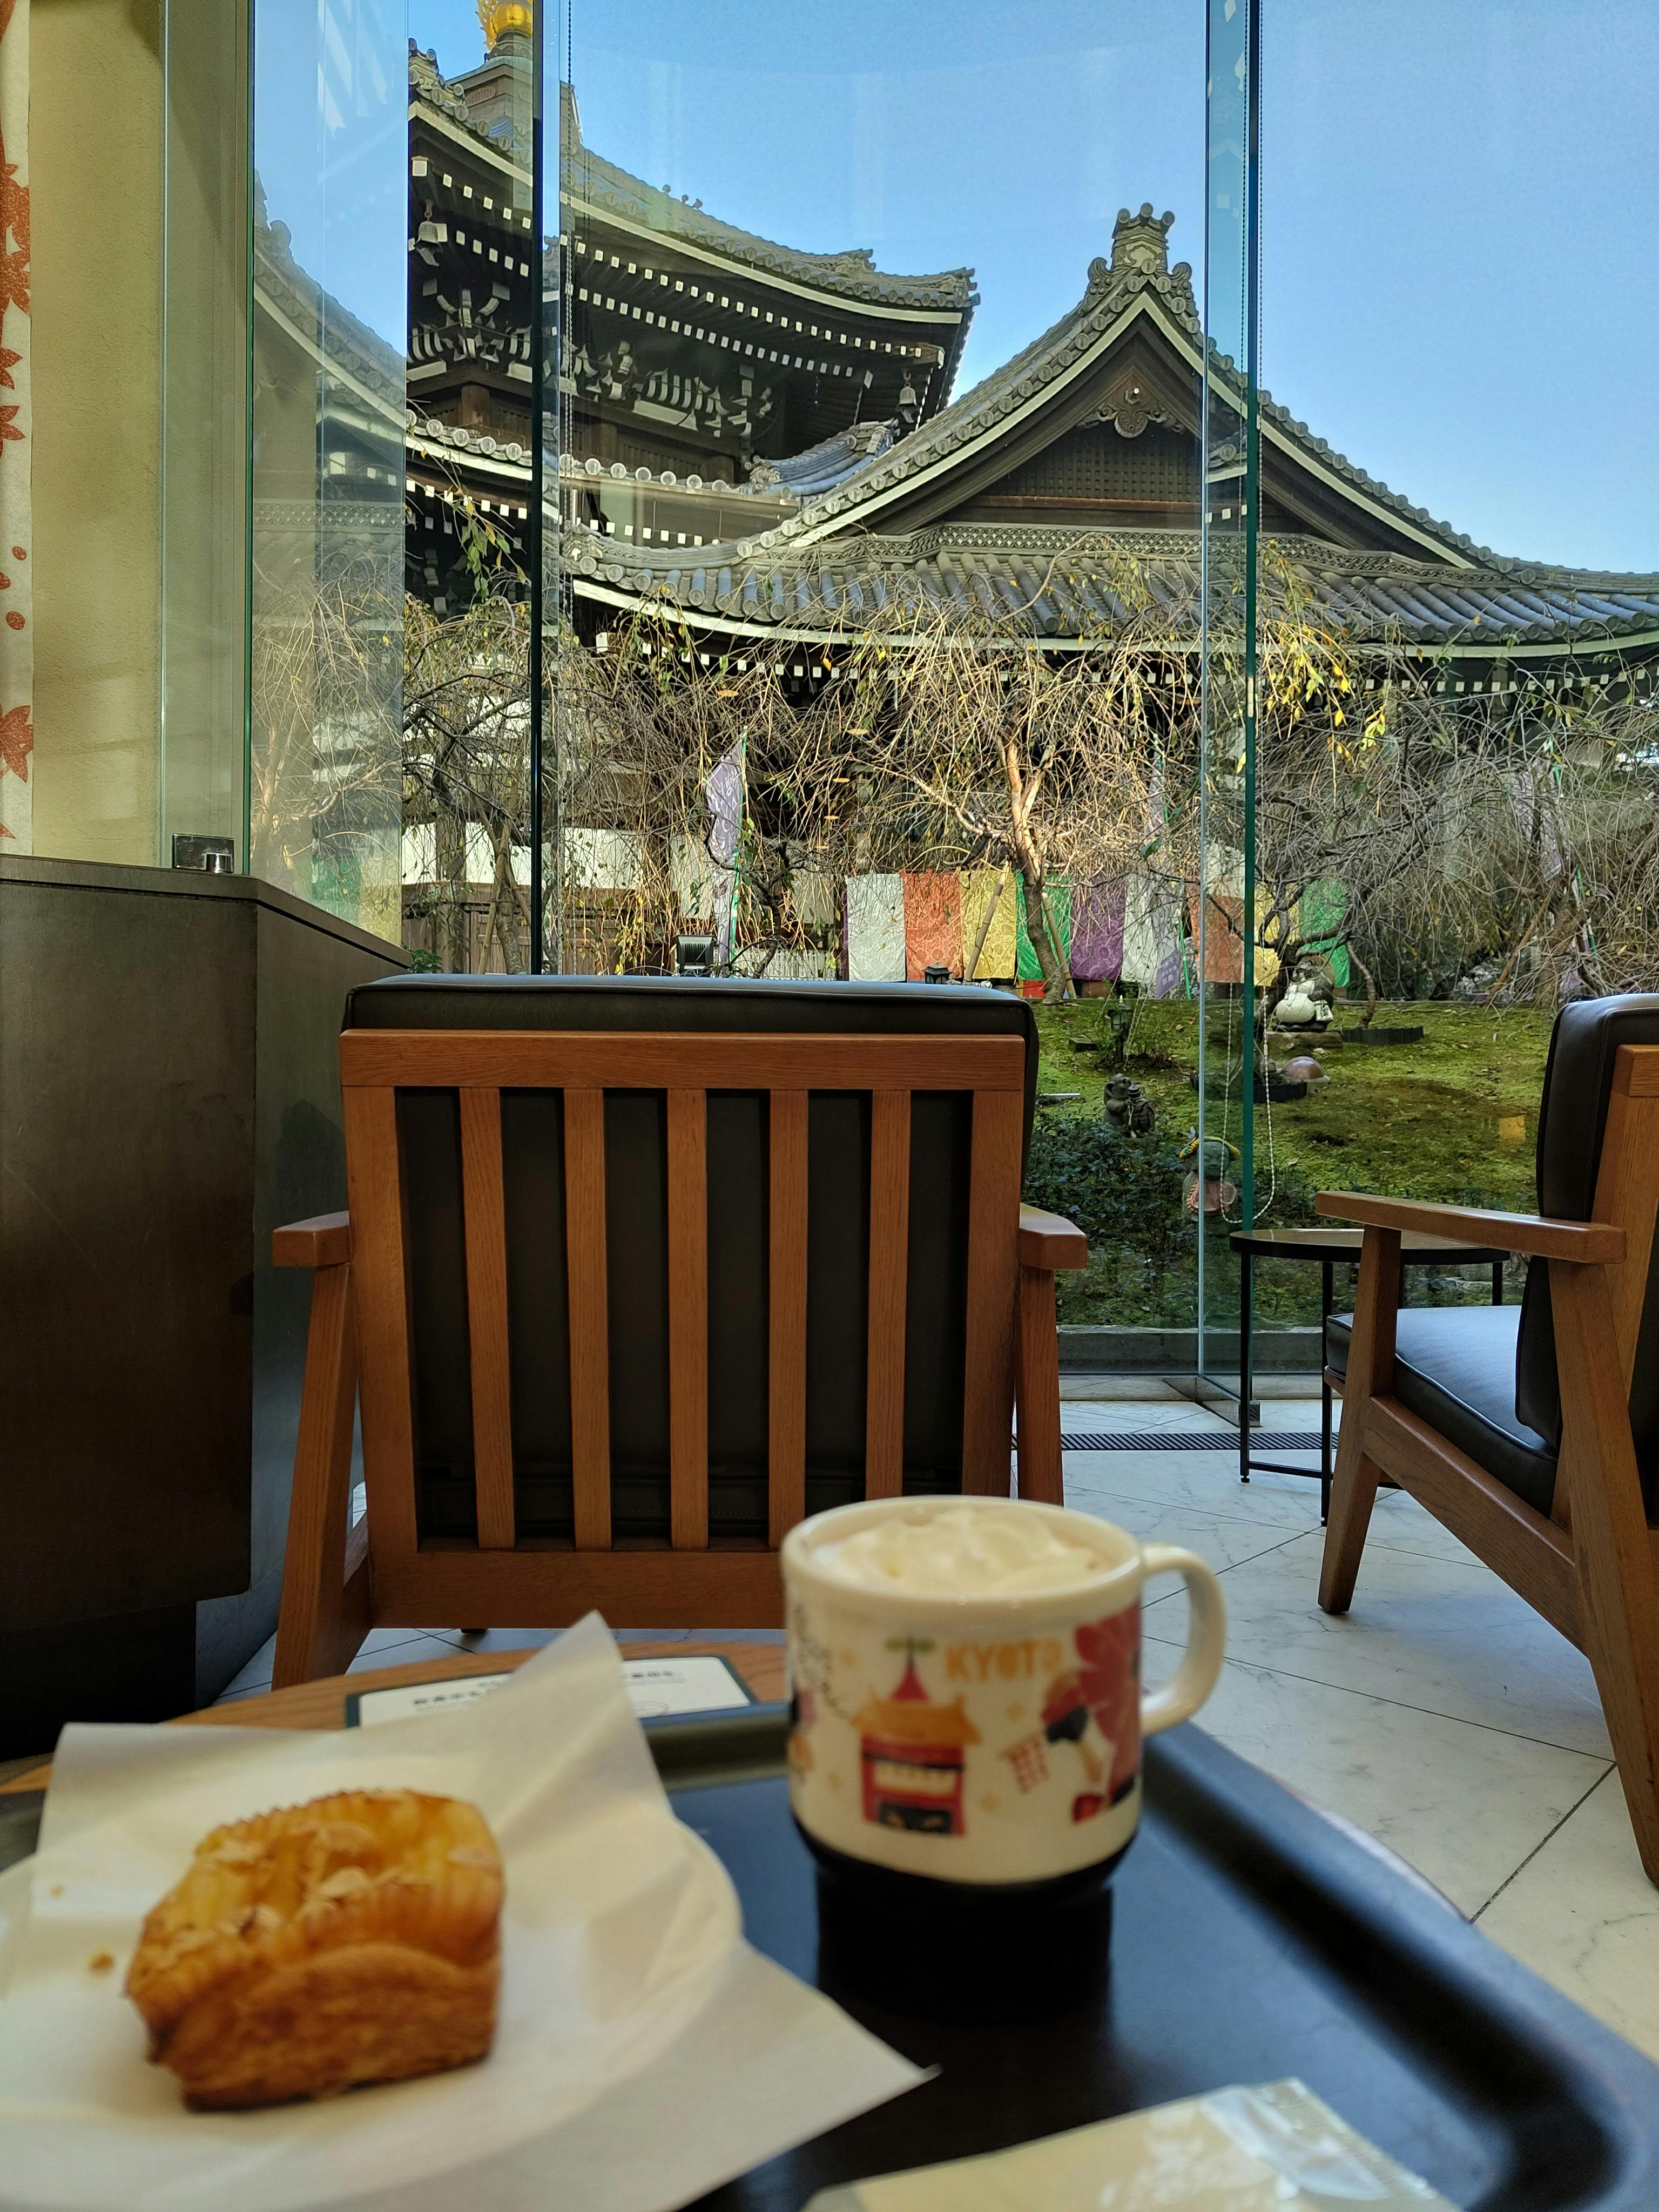 One of the most beautiful Starbucks in Kyoto